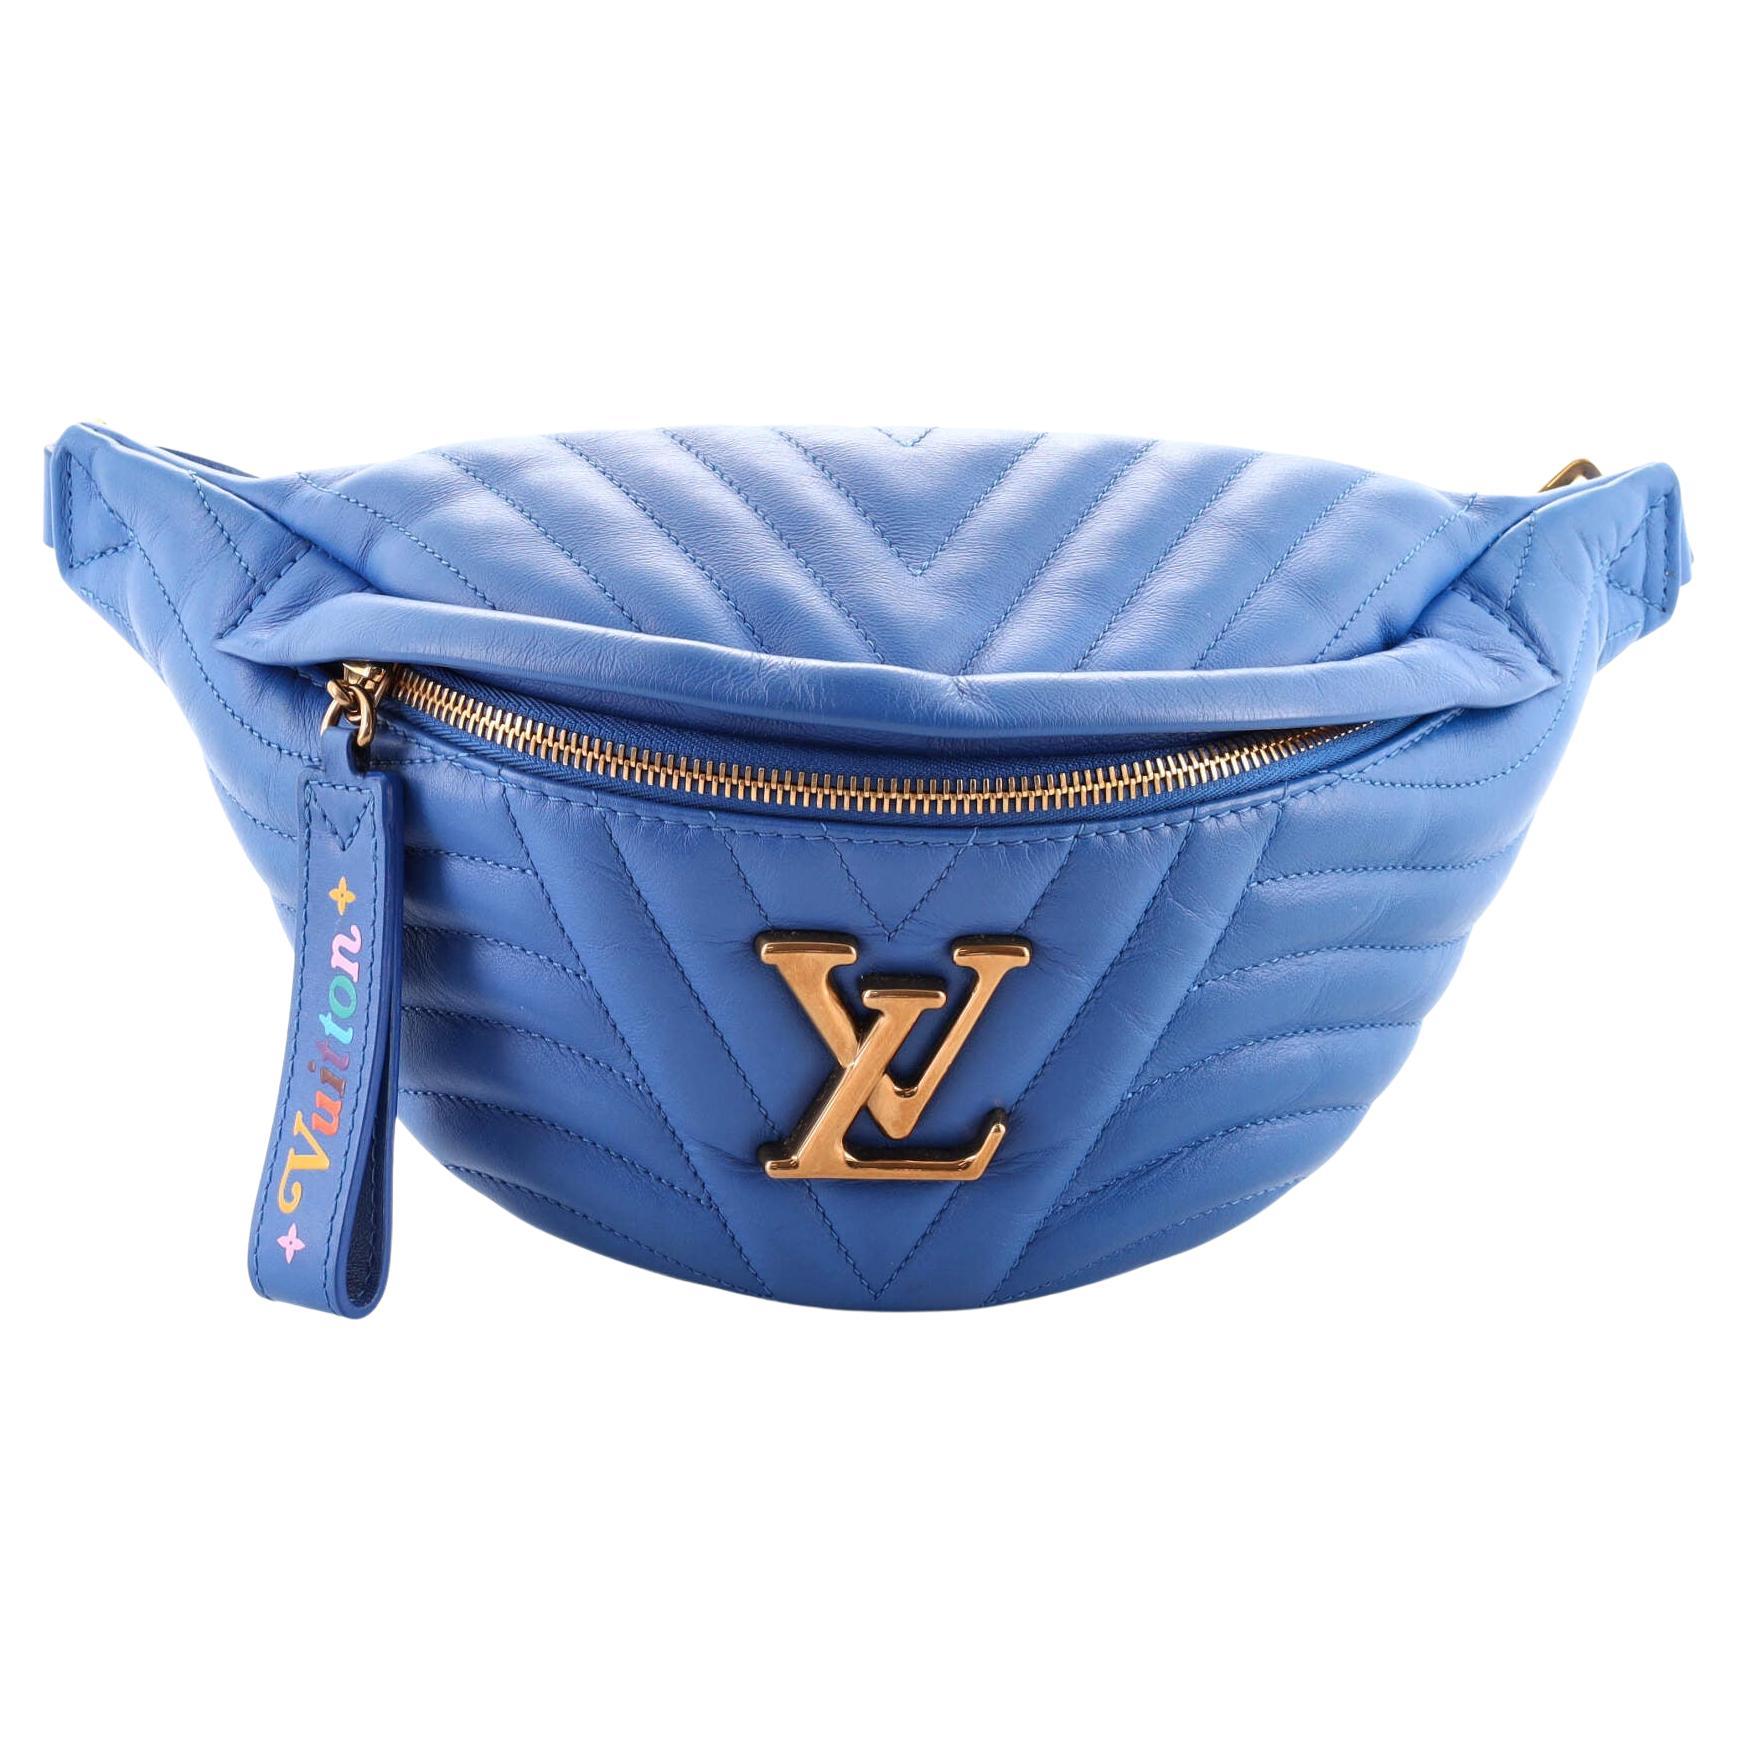 Louis Vuitton Bumbag Blue - 2 For Sale on 1stDibs  luis vuitton bauchtasche,  louis vuitton bauchtasche, louis vuitton bauchtadche